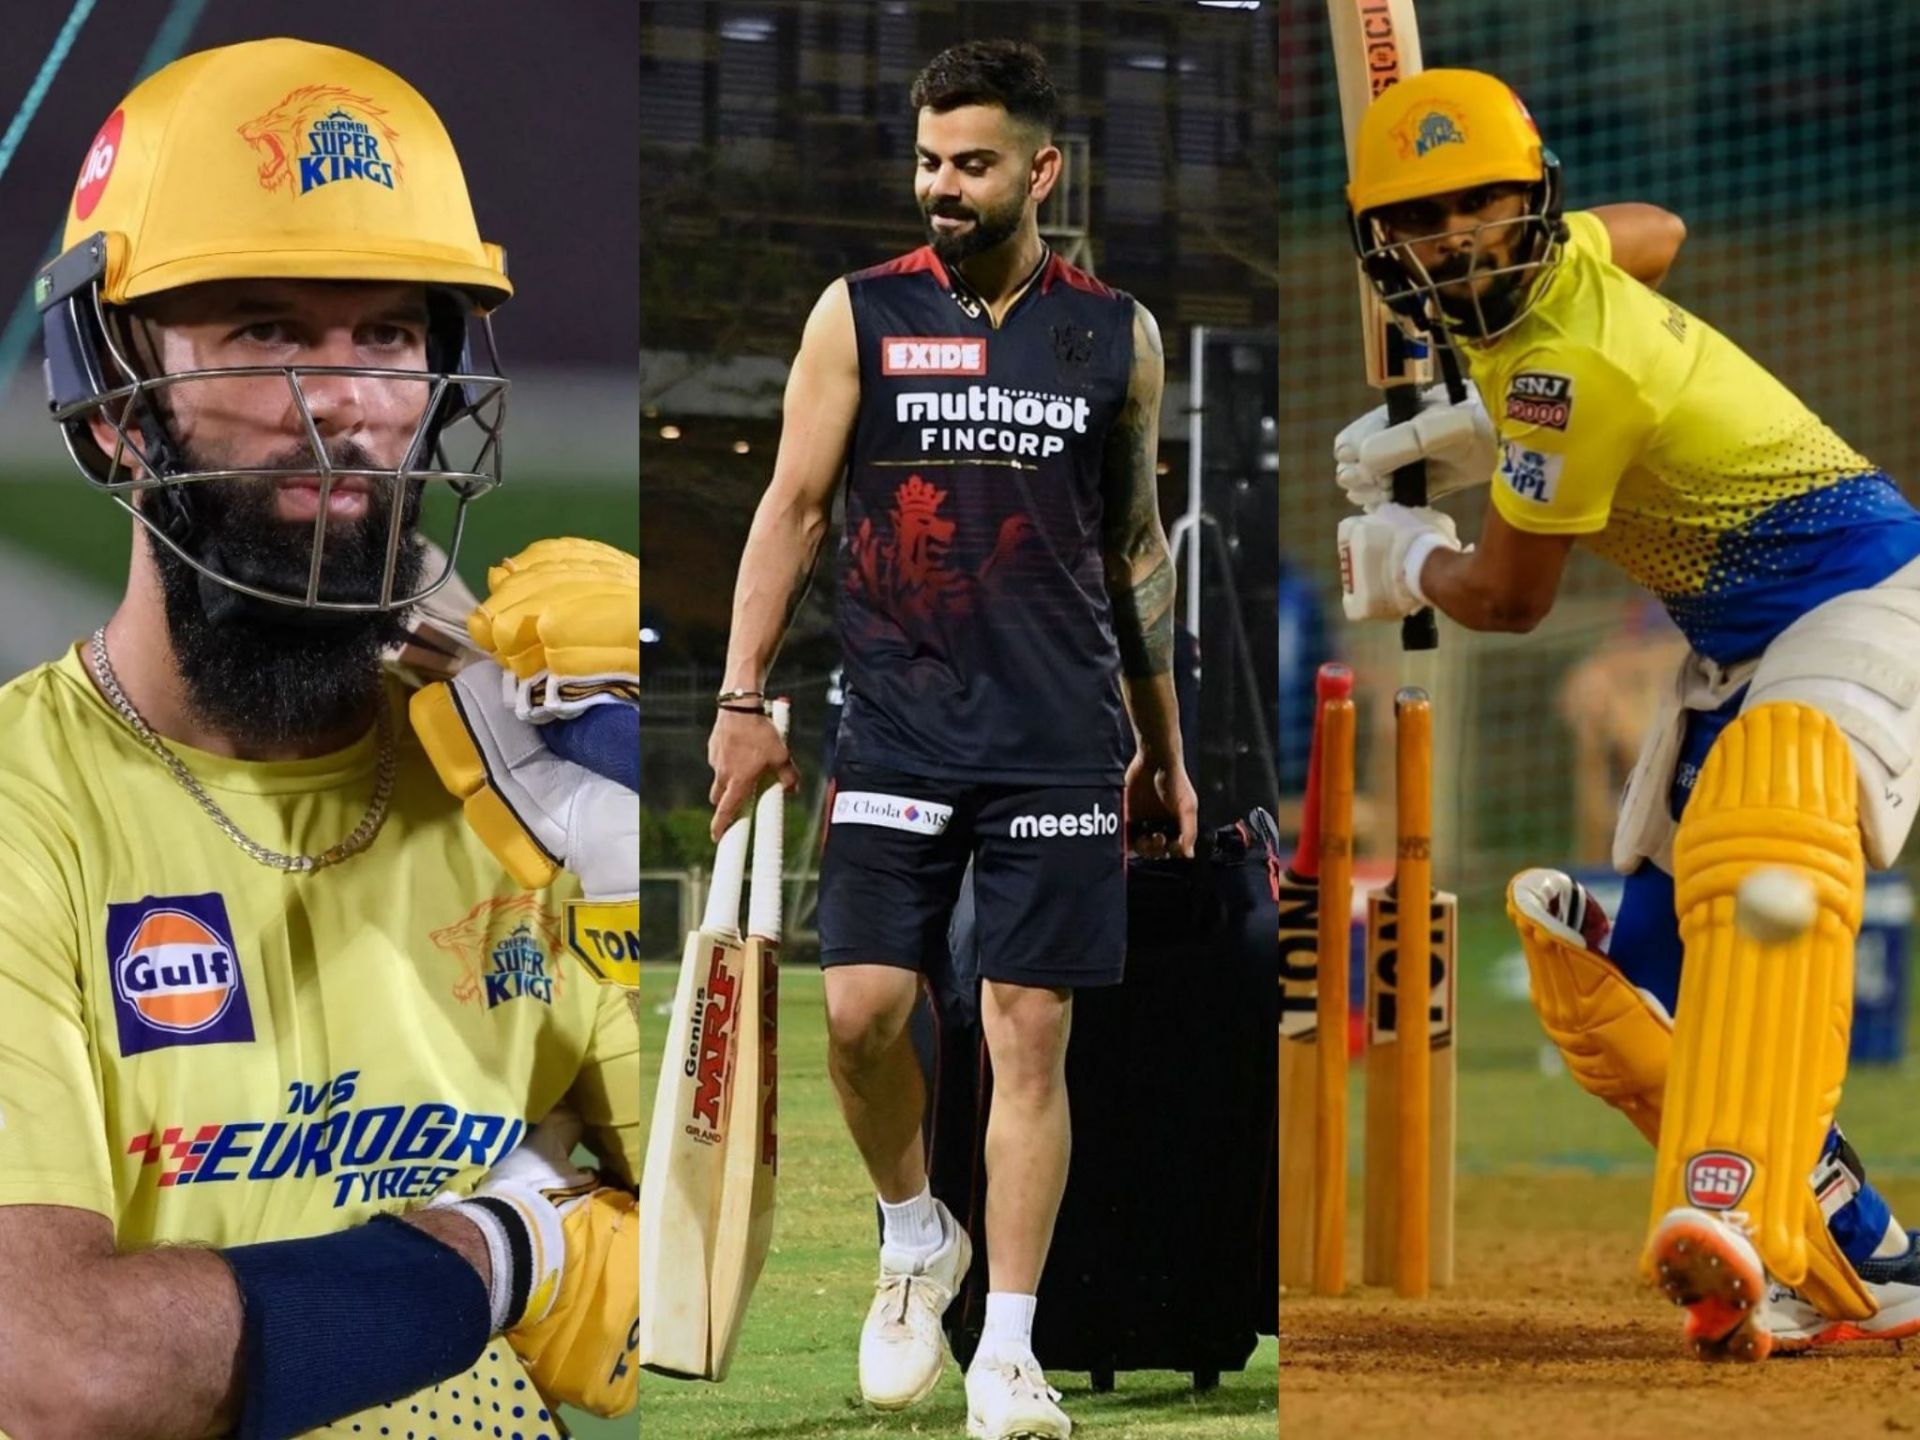 Match 22 of the IPL 2022 will be played between the Chennai Super Kings and Royal Challengers Bangalore